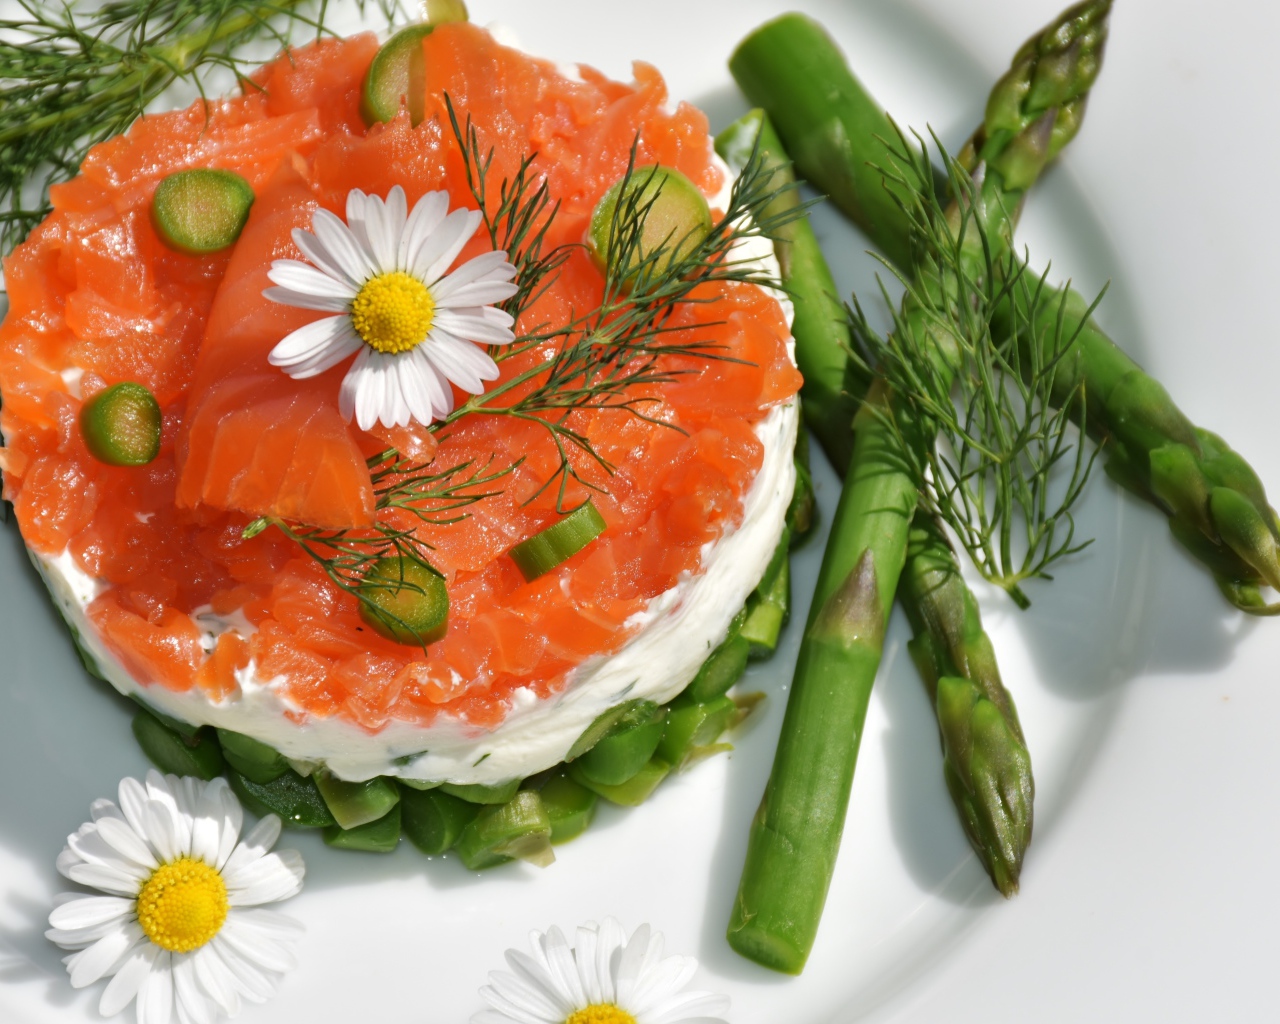 Red fish salad on a plate with asparagus, dill and chamomile flowers